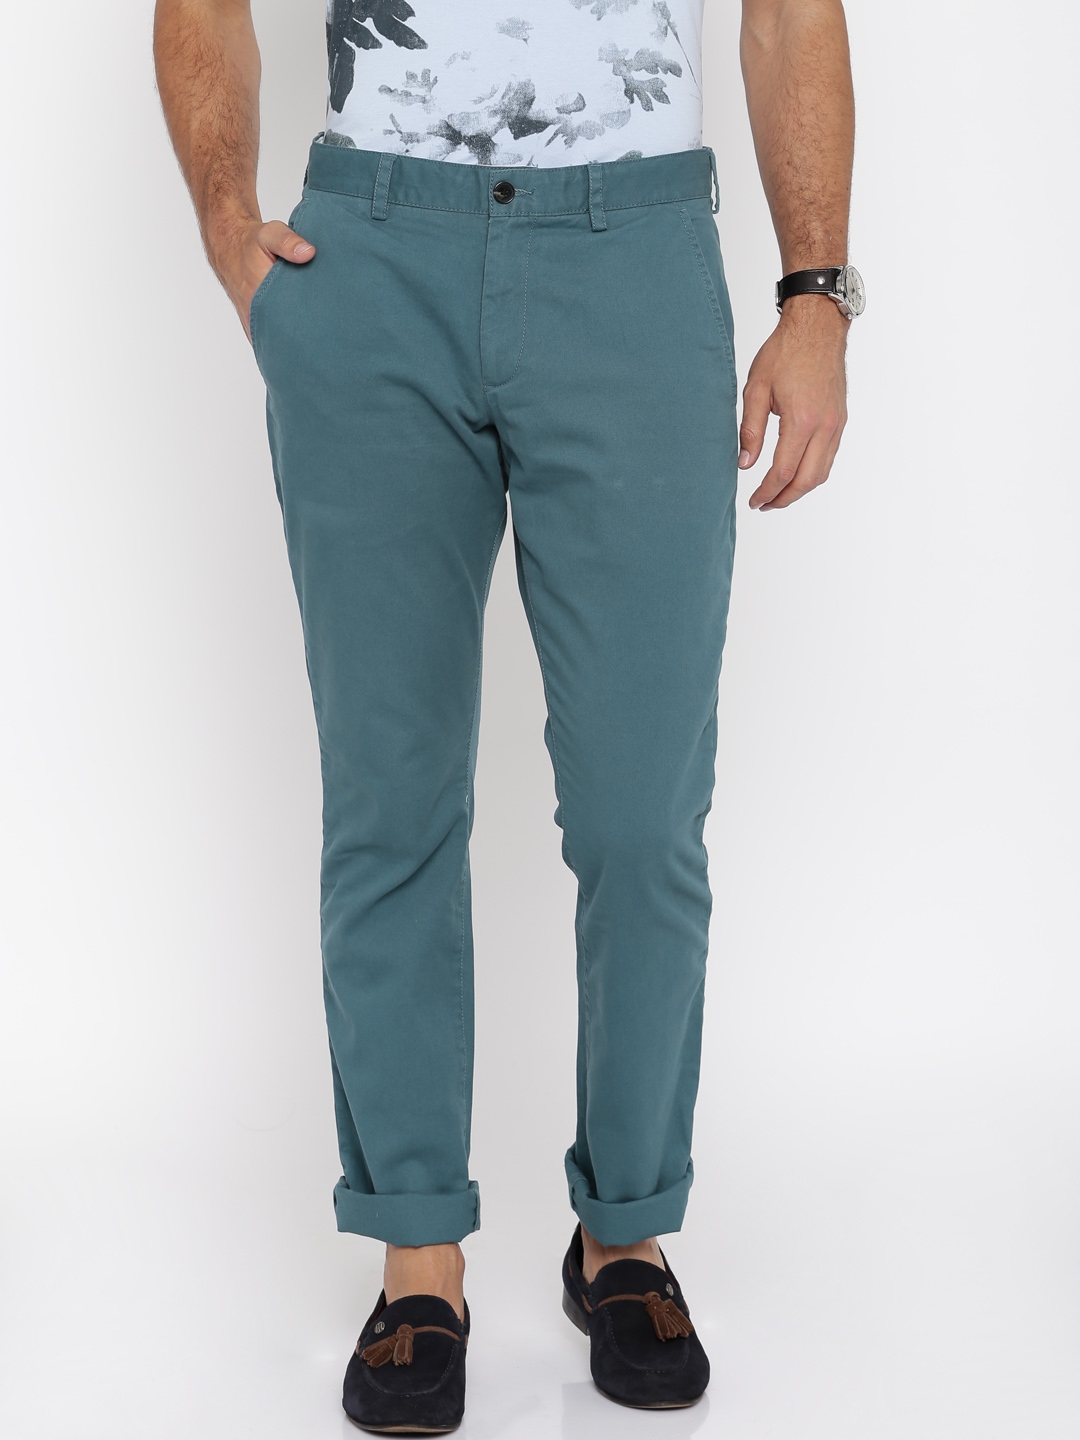 Buy French Connection Teal Blue Chinos Trousers - Trousers for Men ...